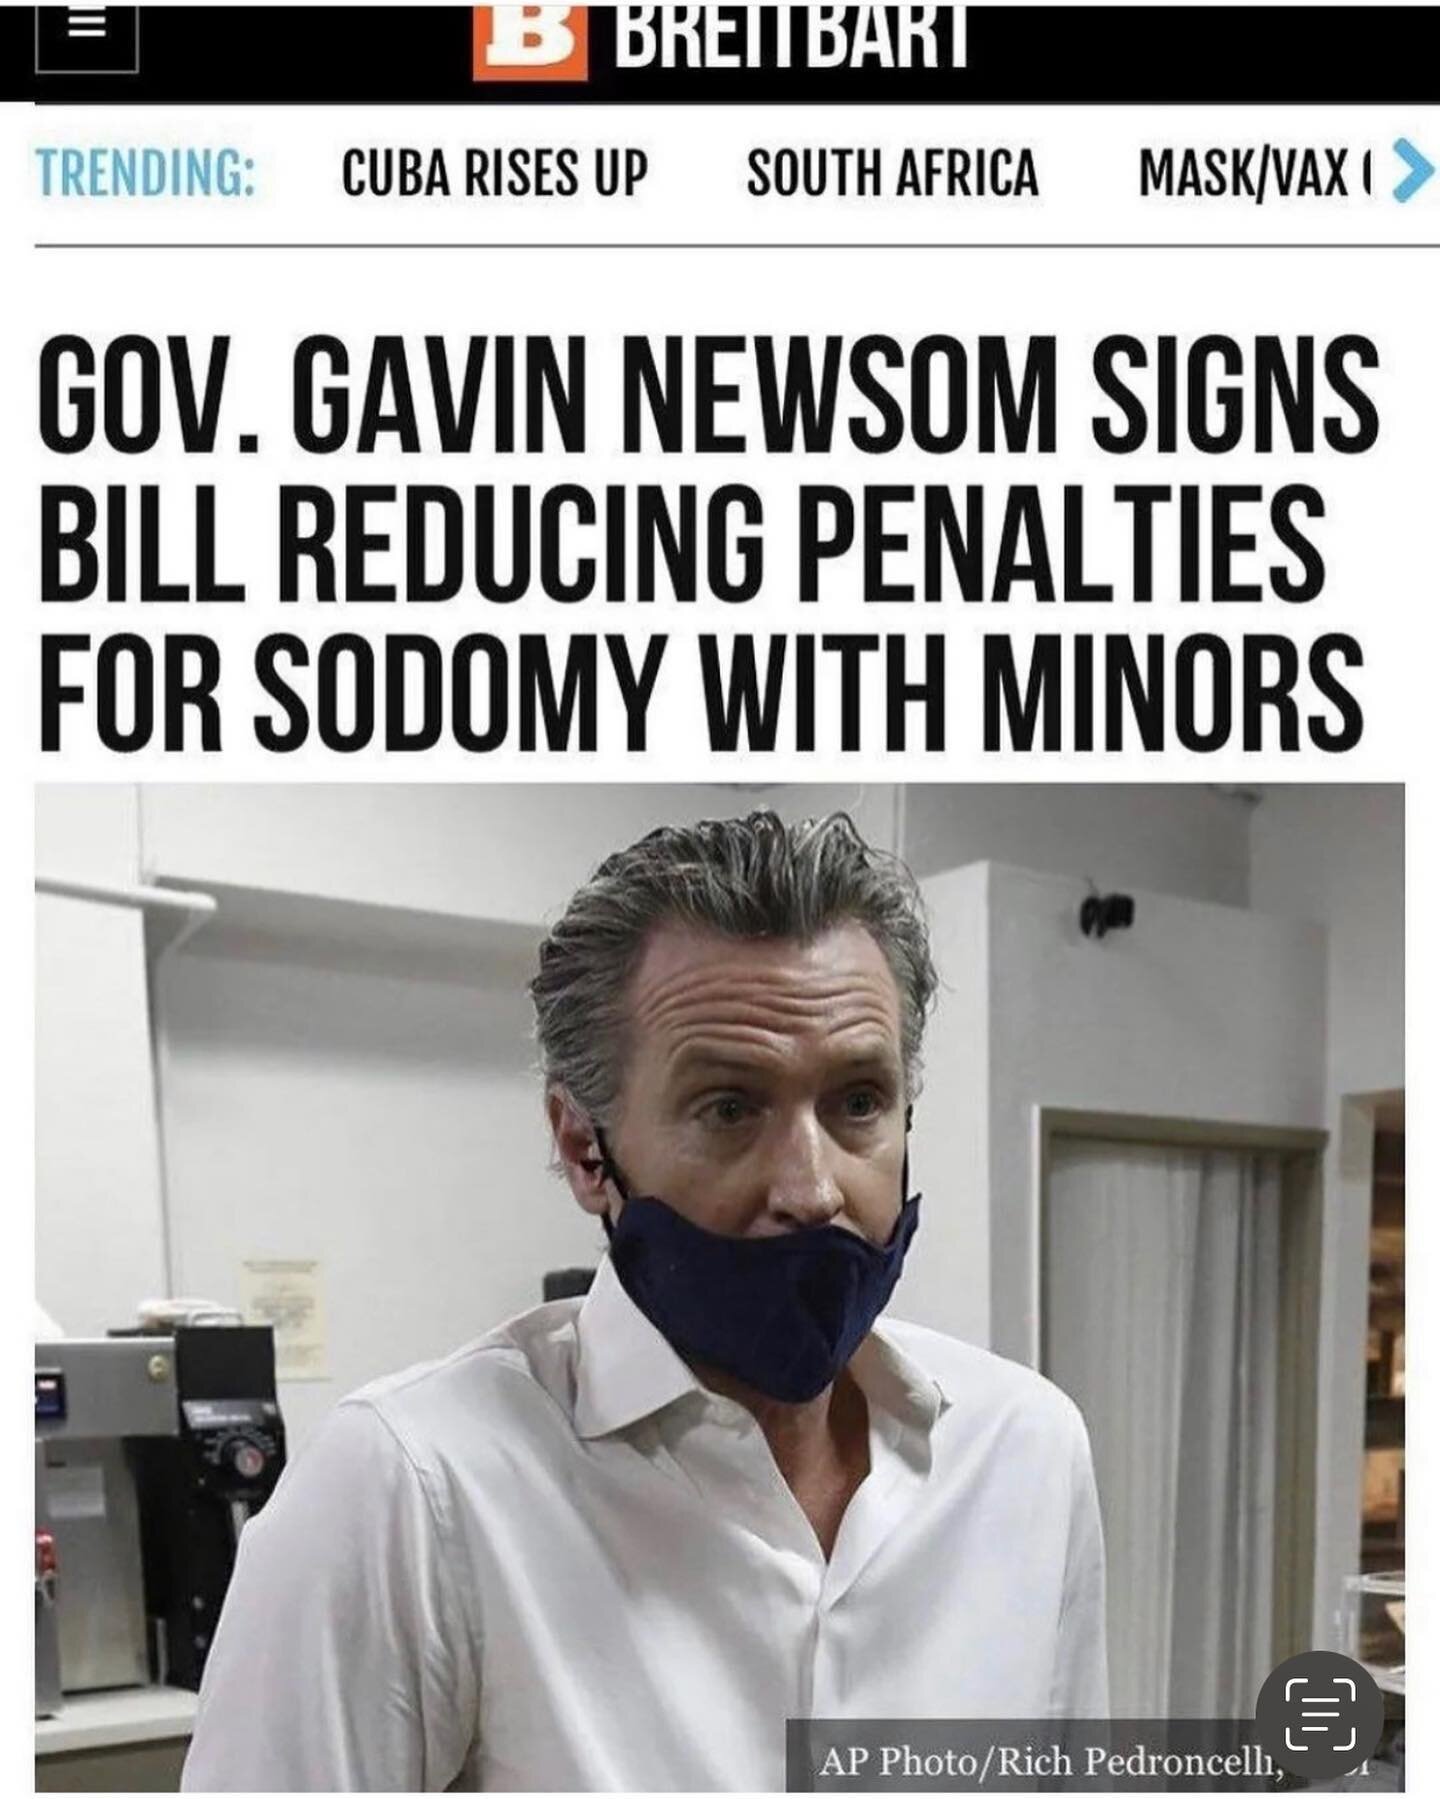 Pedophile protector AG. @gavinnewsom 
The left is going to run this guy for President of the United States, a protector of sodomy and pedophiles, one who is answering to the puppeteer&lsquo;s who&rsquo;s pulling the puppet strings who kept him in off